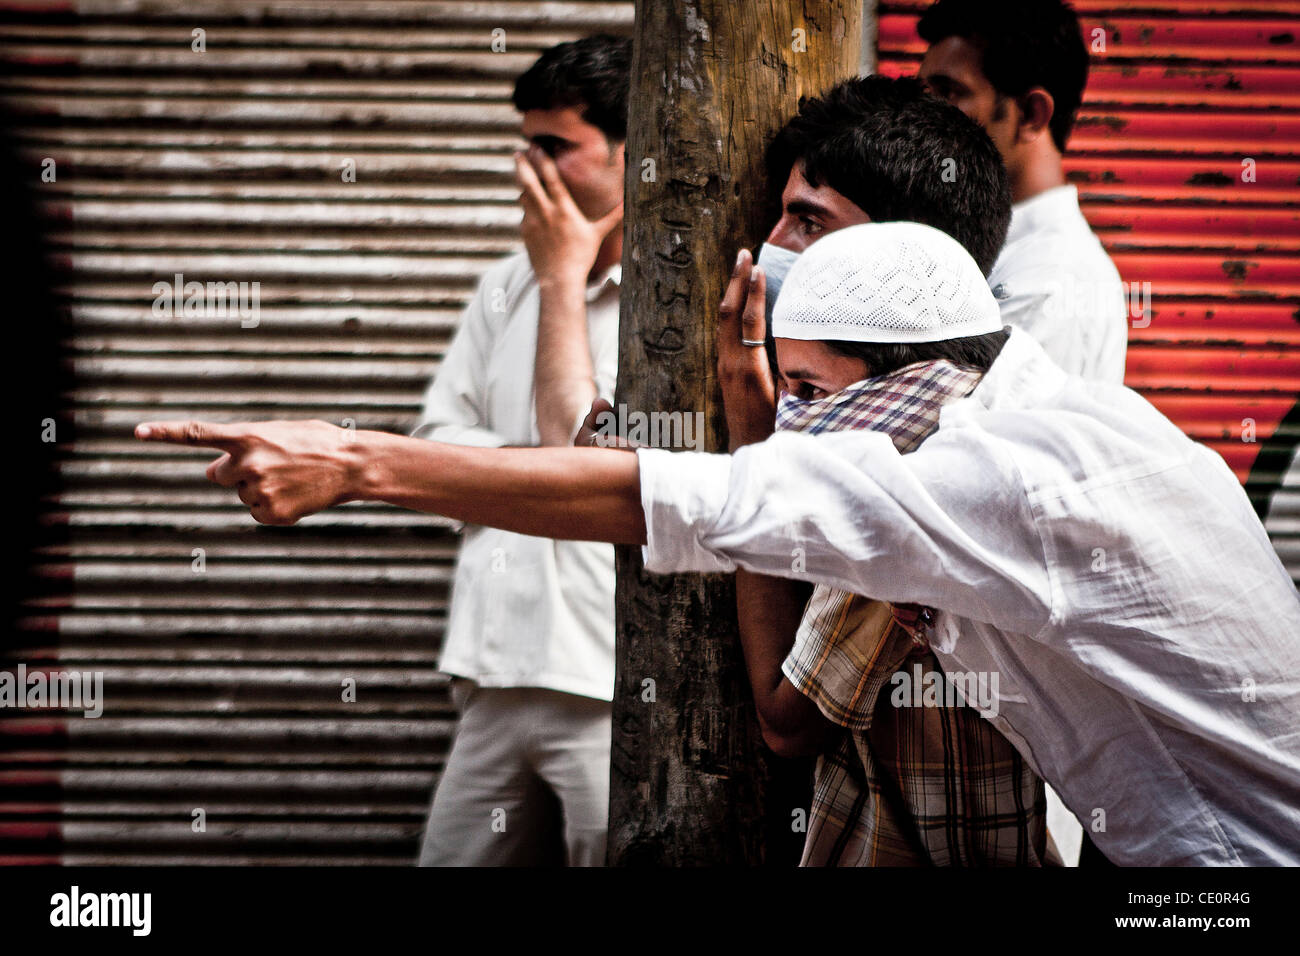 Kashmiri muslim stone pelters during a street protest with the paramilitary indian force and police in downtown of Srinagar. Protest was held in Nowhatta area by stone-throwing youths against Indian's rule in disputed territory of Kashmir, where anti-India sentiment runs deep among the majority musl Stock Photo